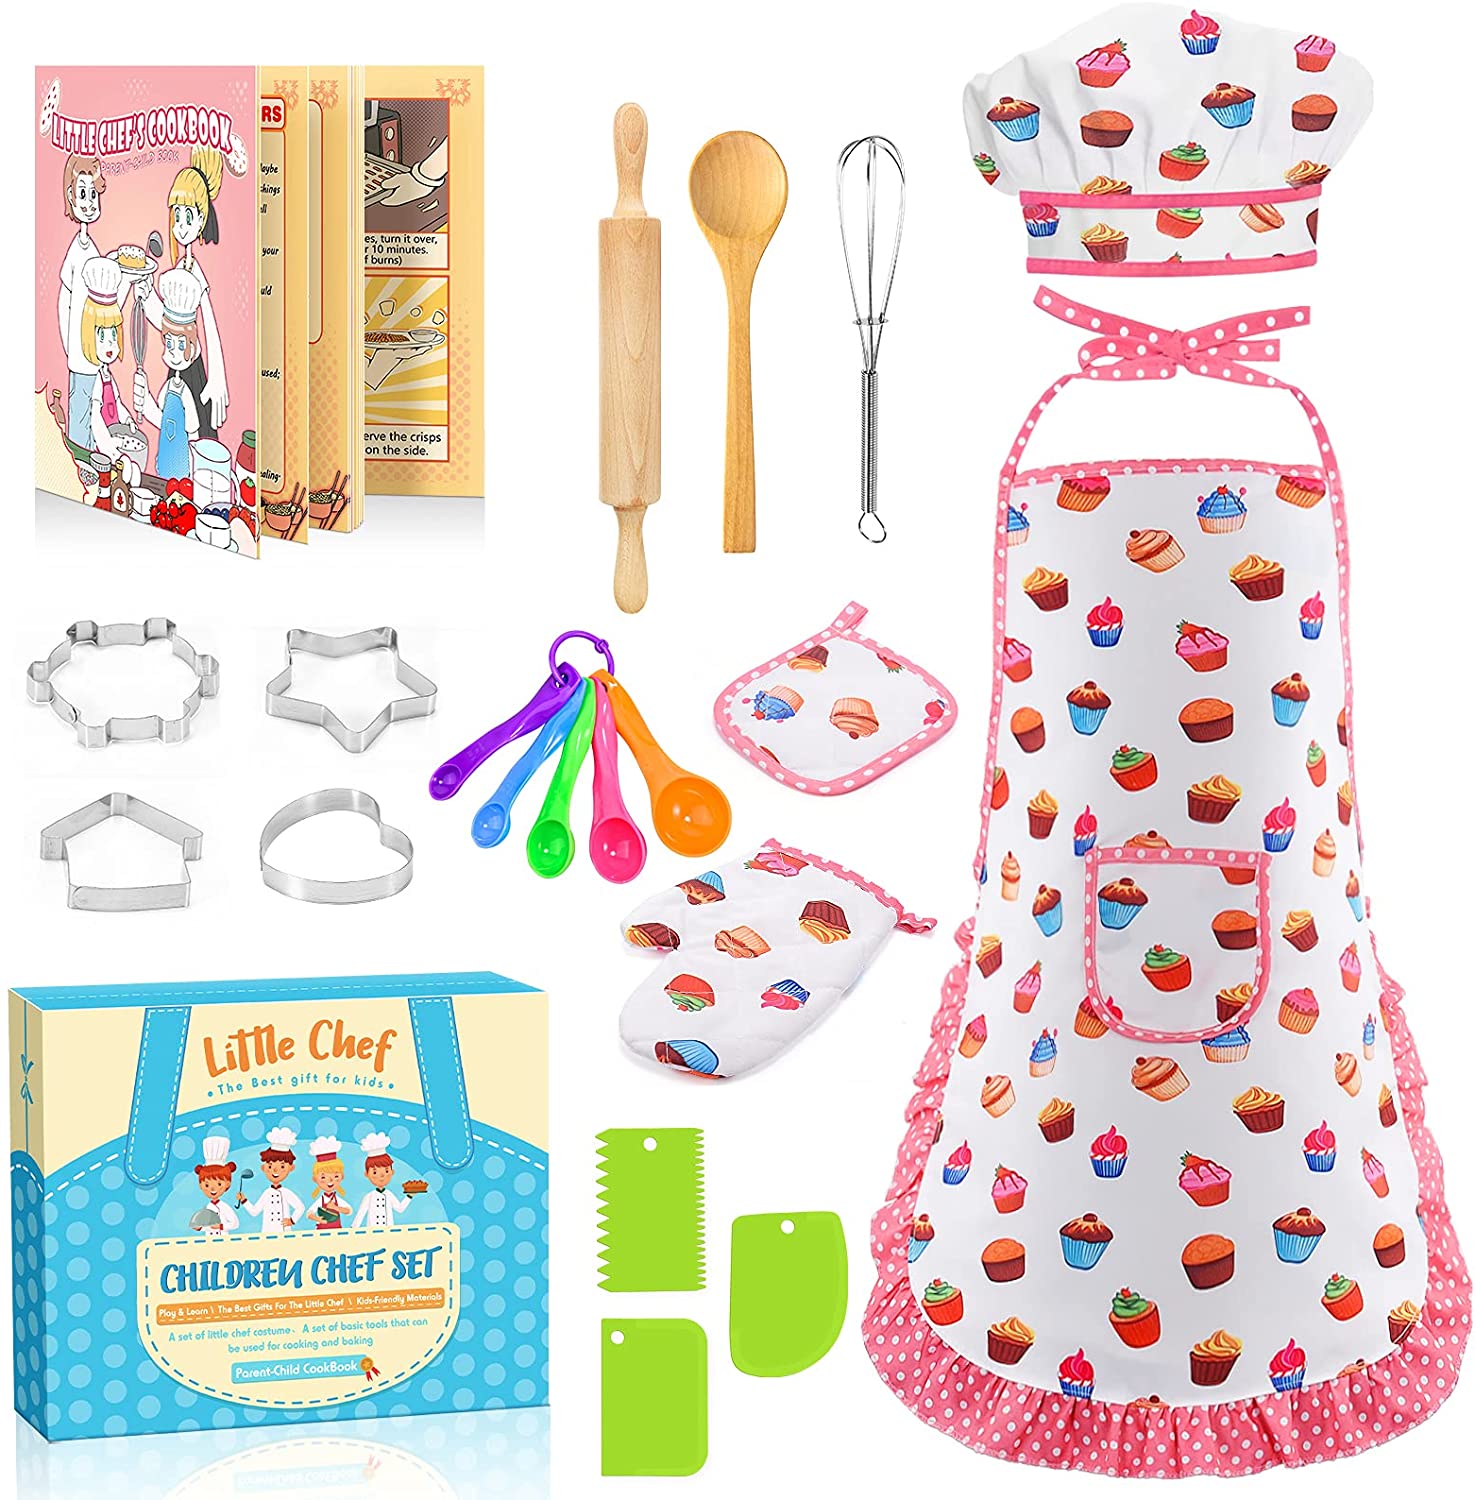 Chef Set for Kids Cooking Tool Baking Play Apron for Girls Toddler Gifts Toys 